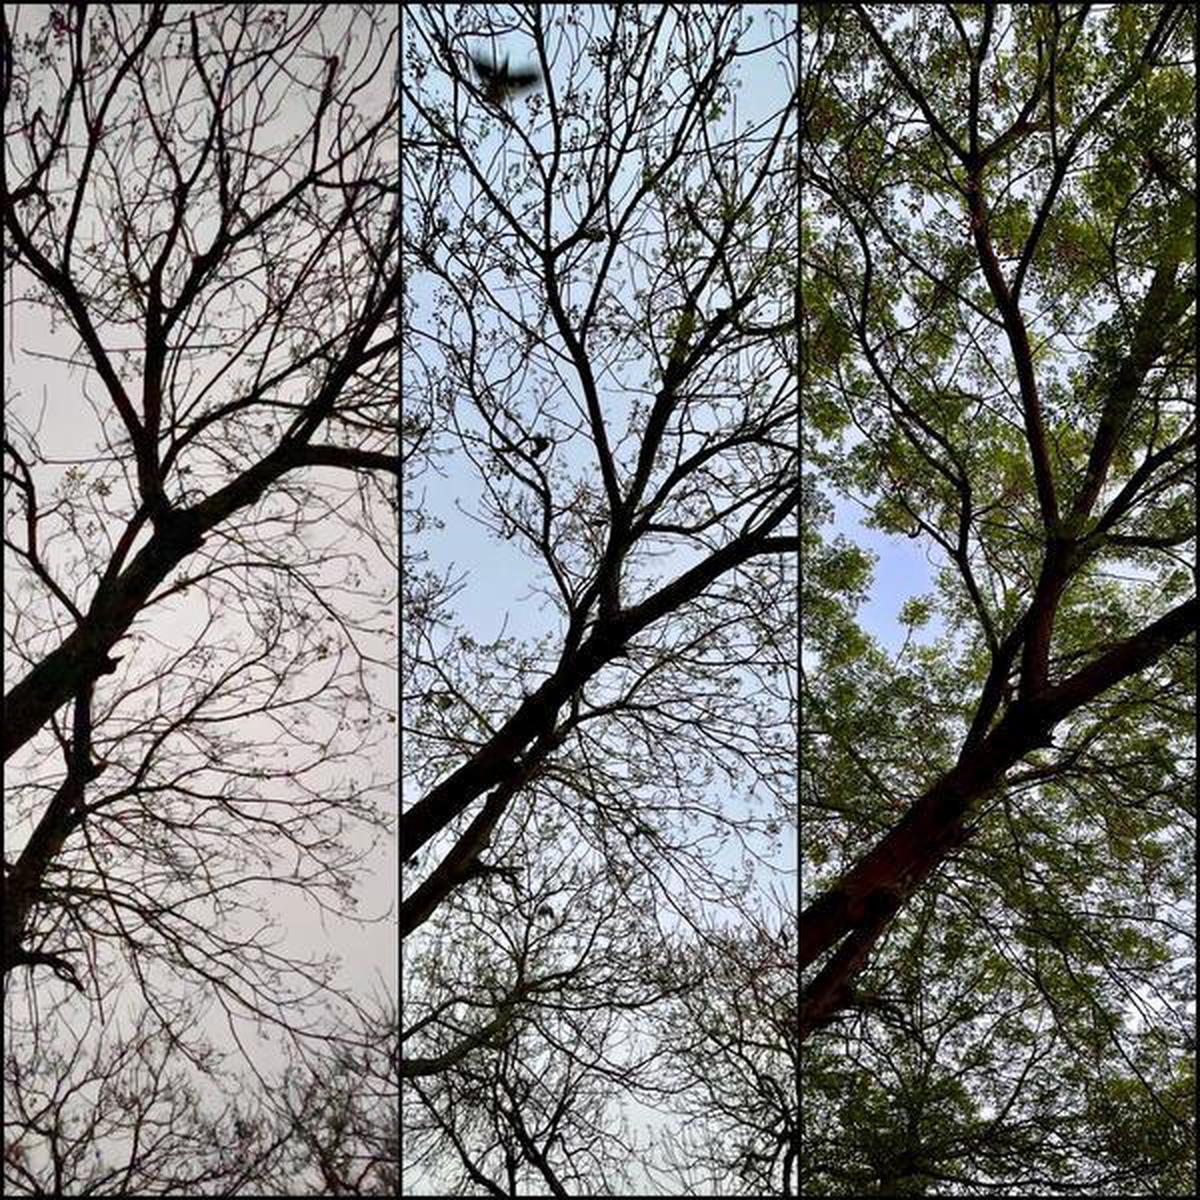 Dinesh Khanna photographed this tree from a same angle, in three different seasons